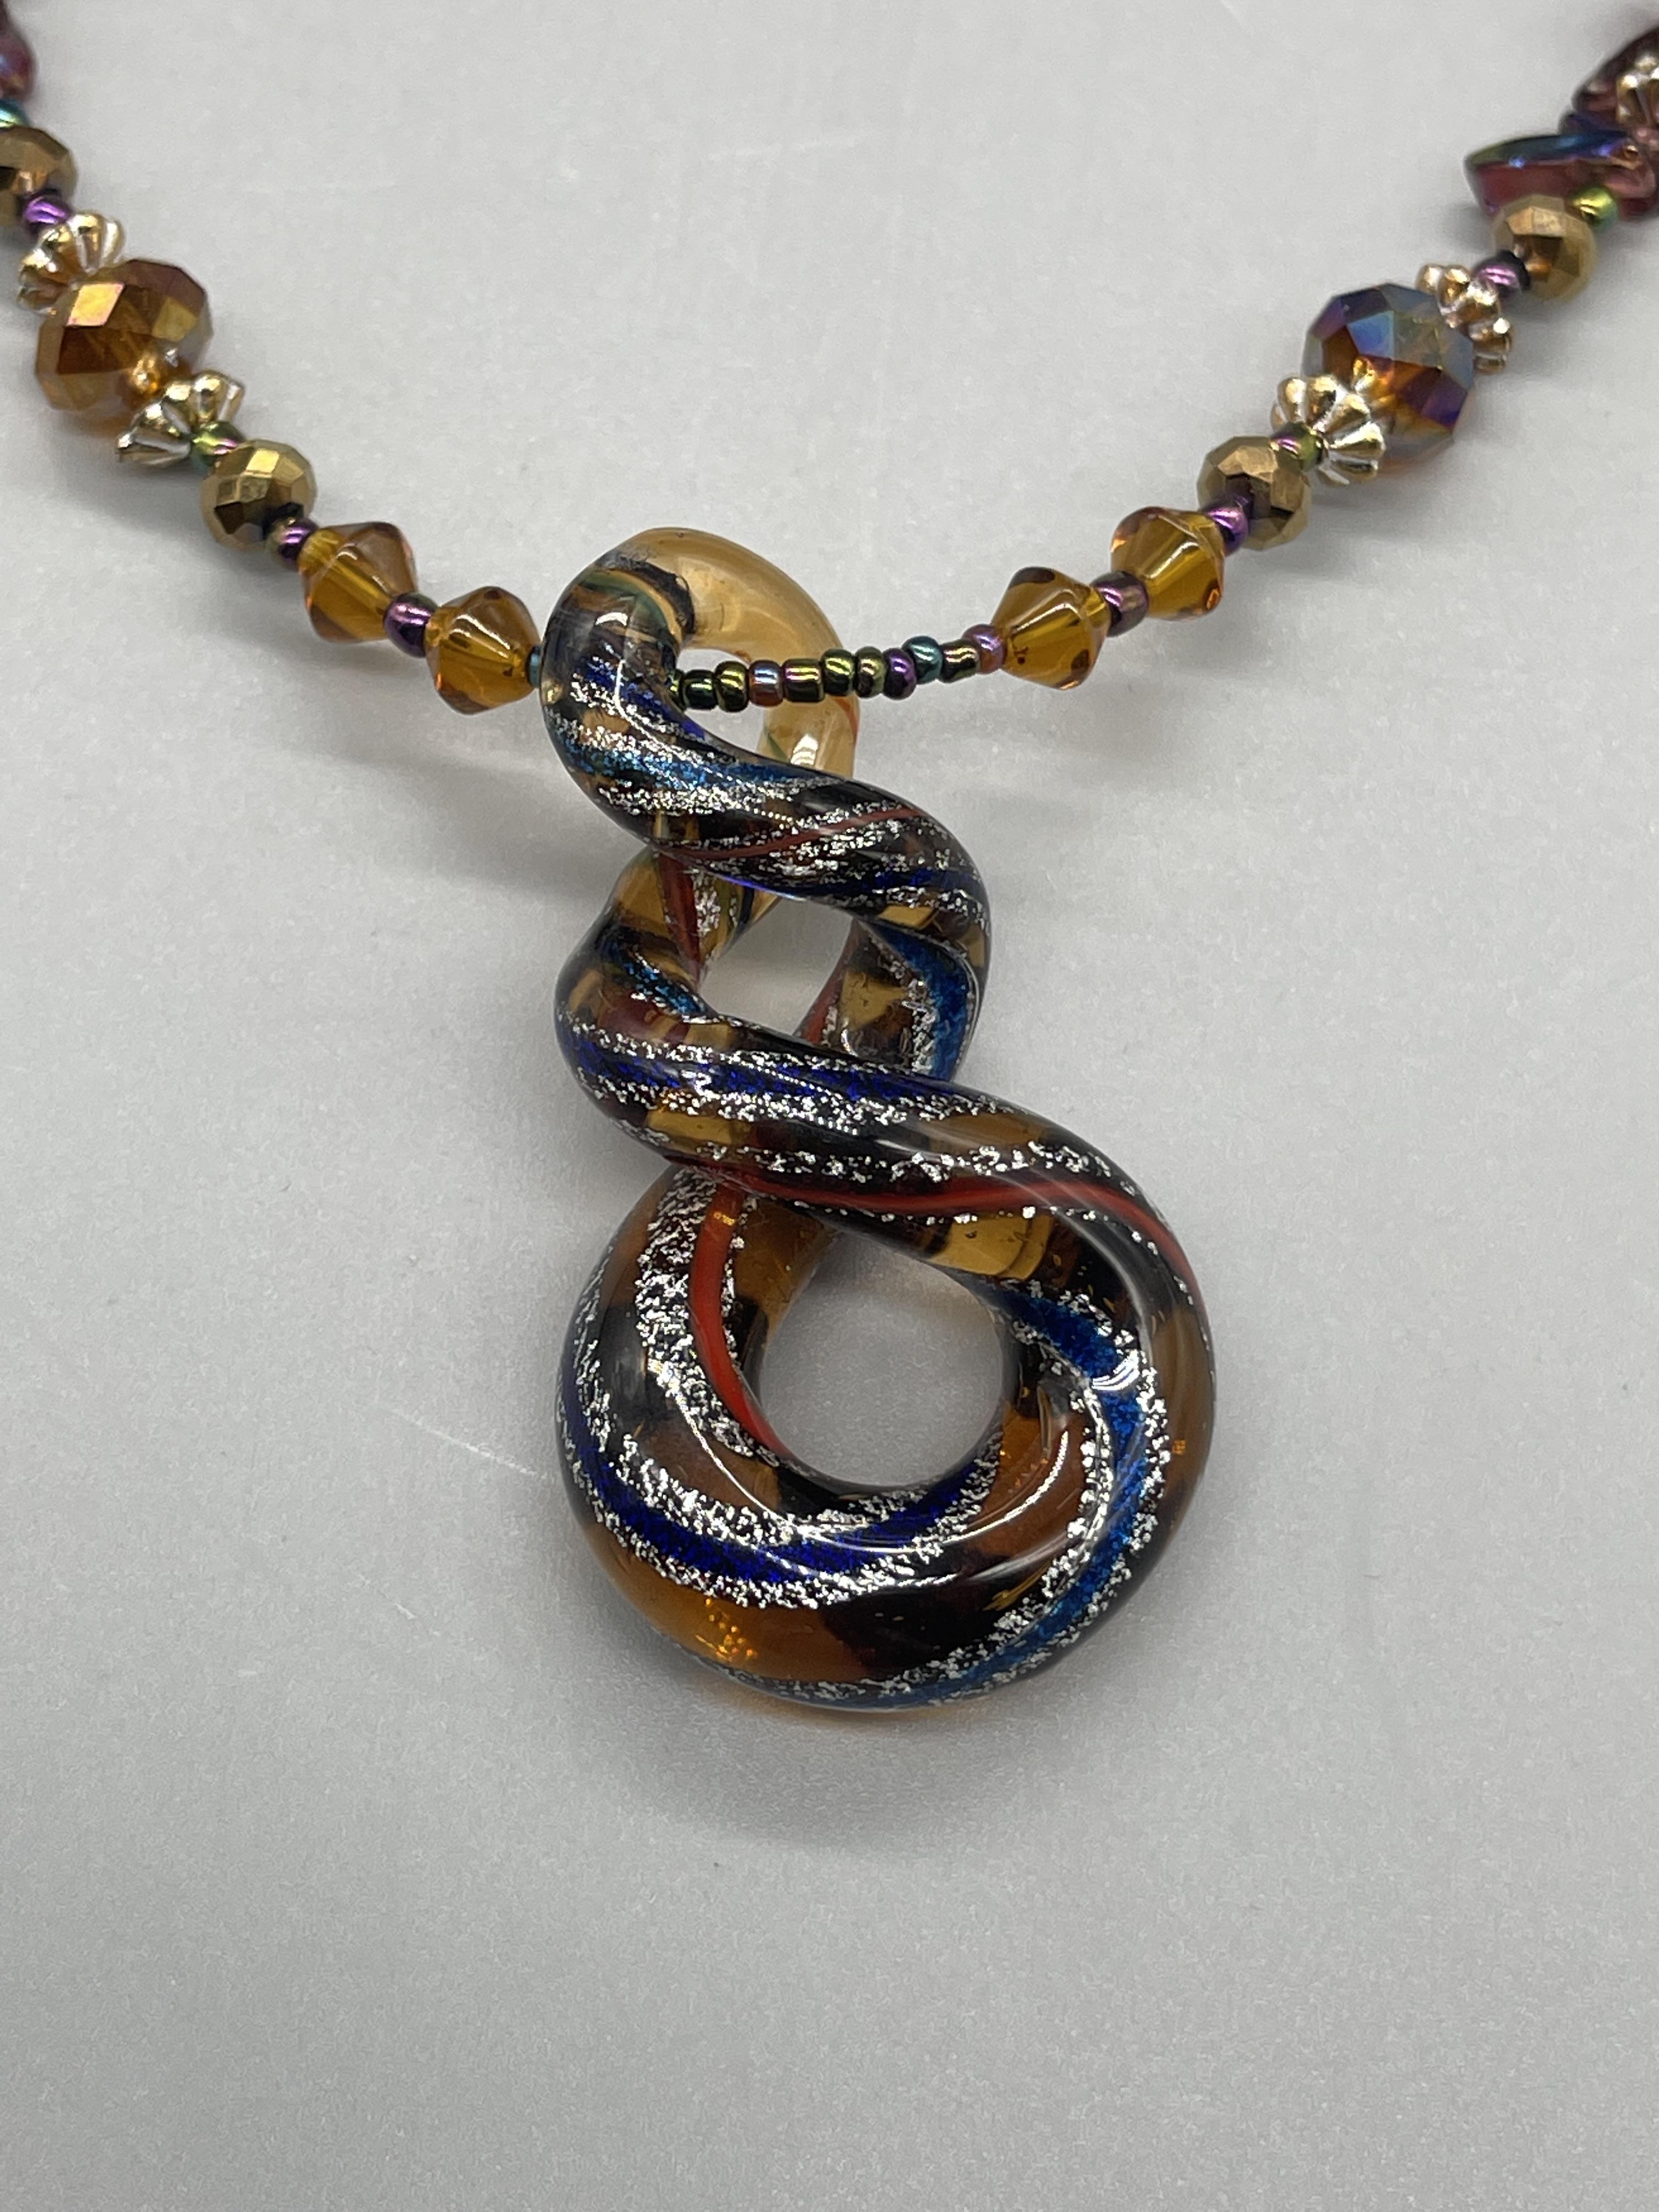 MURANO Unusual blown glass necklace - Image 3 of 6